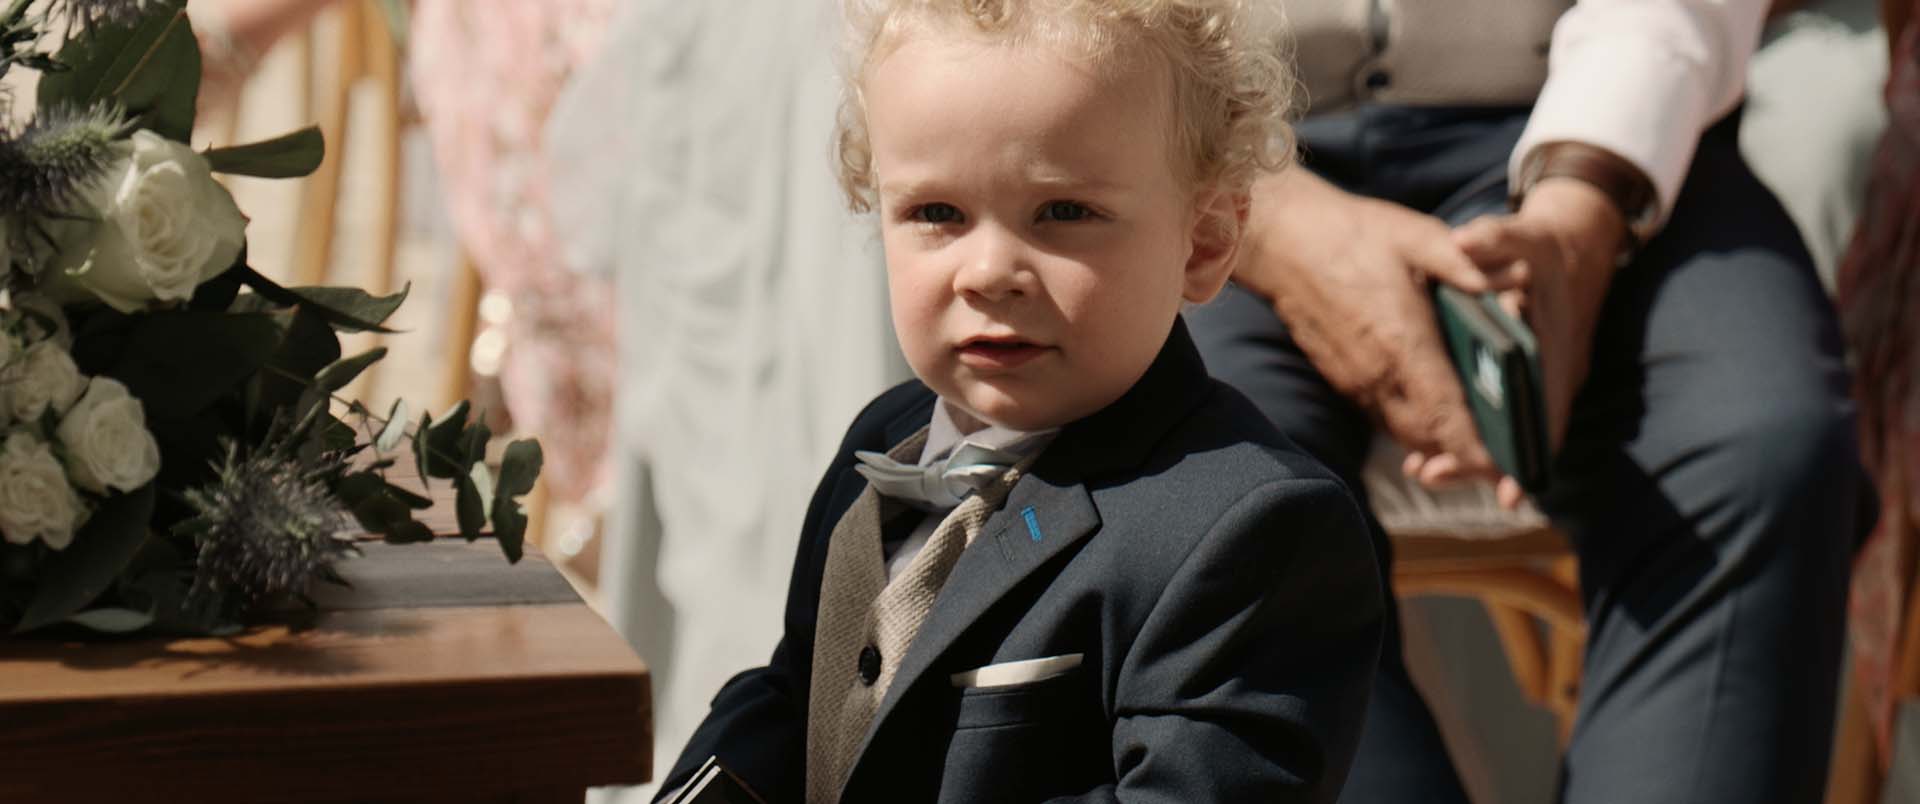 Kid at Wedding in Cyprus